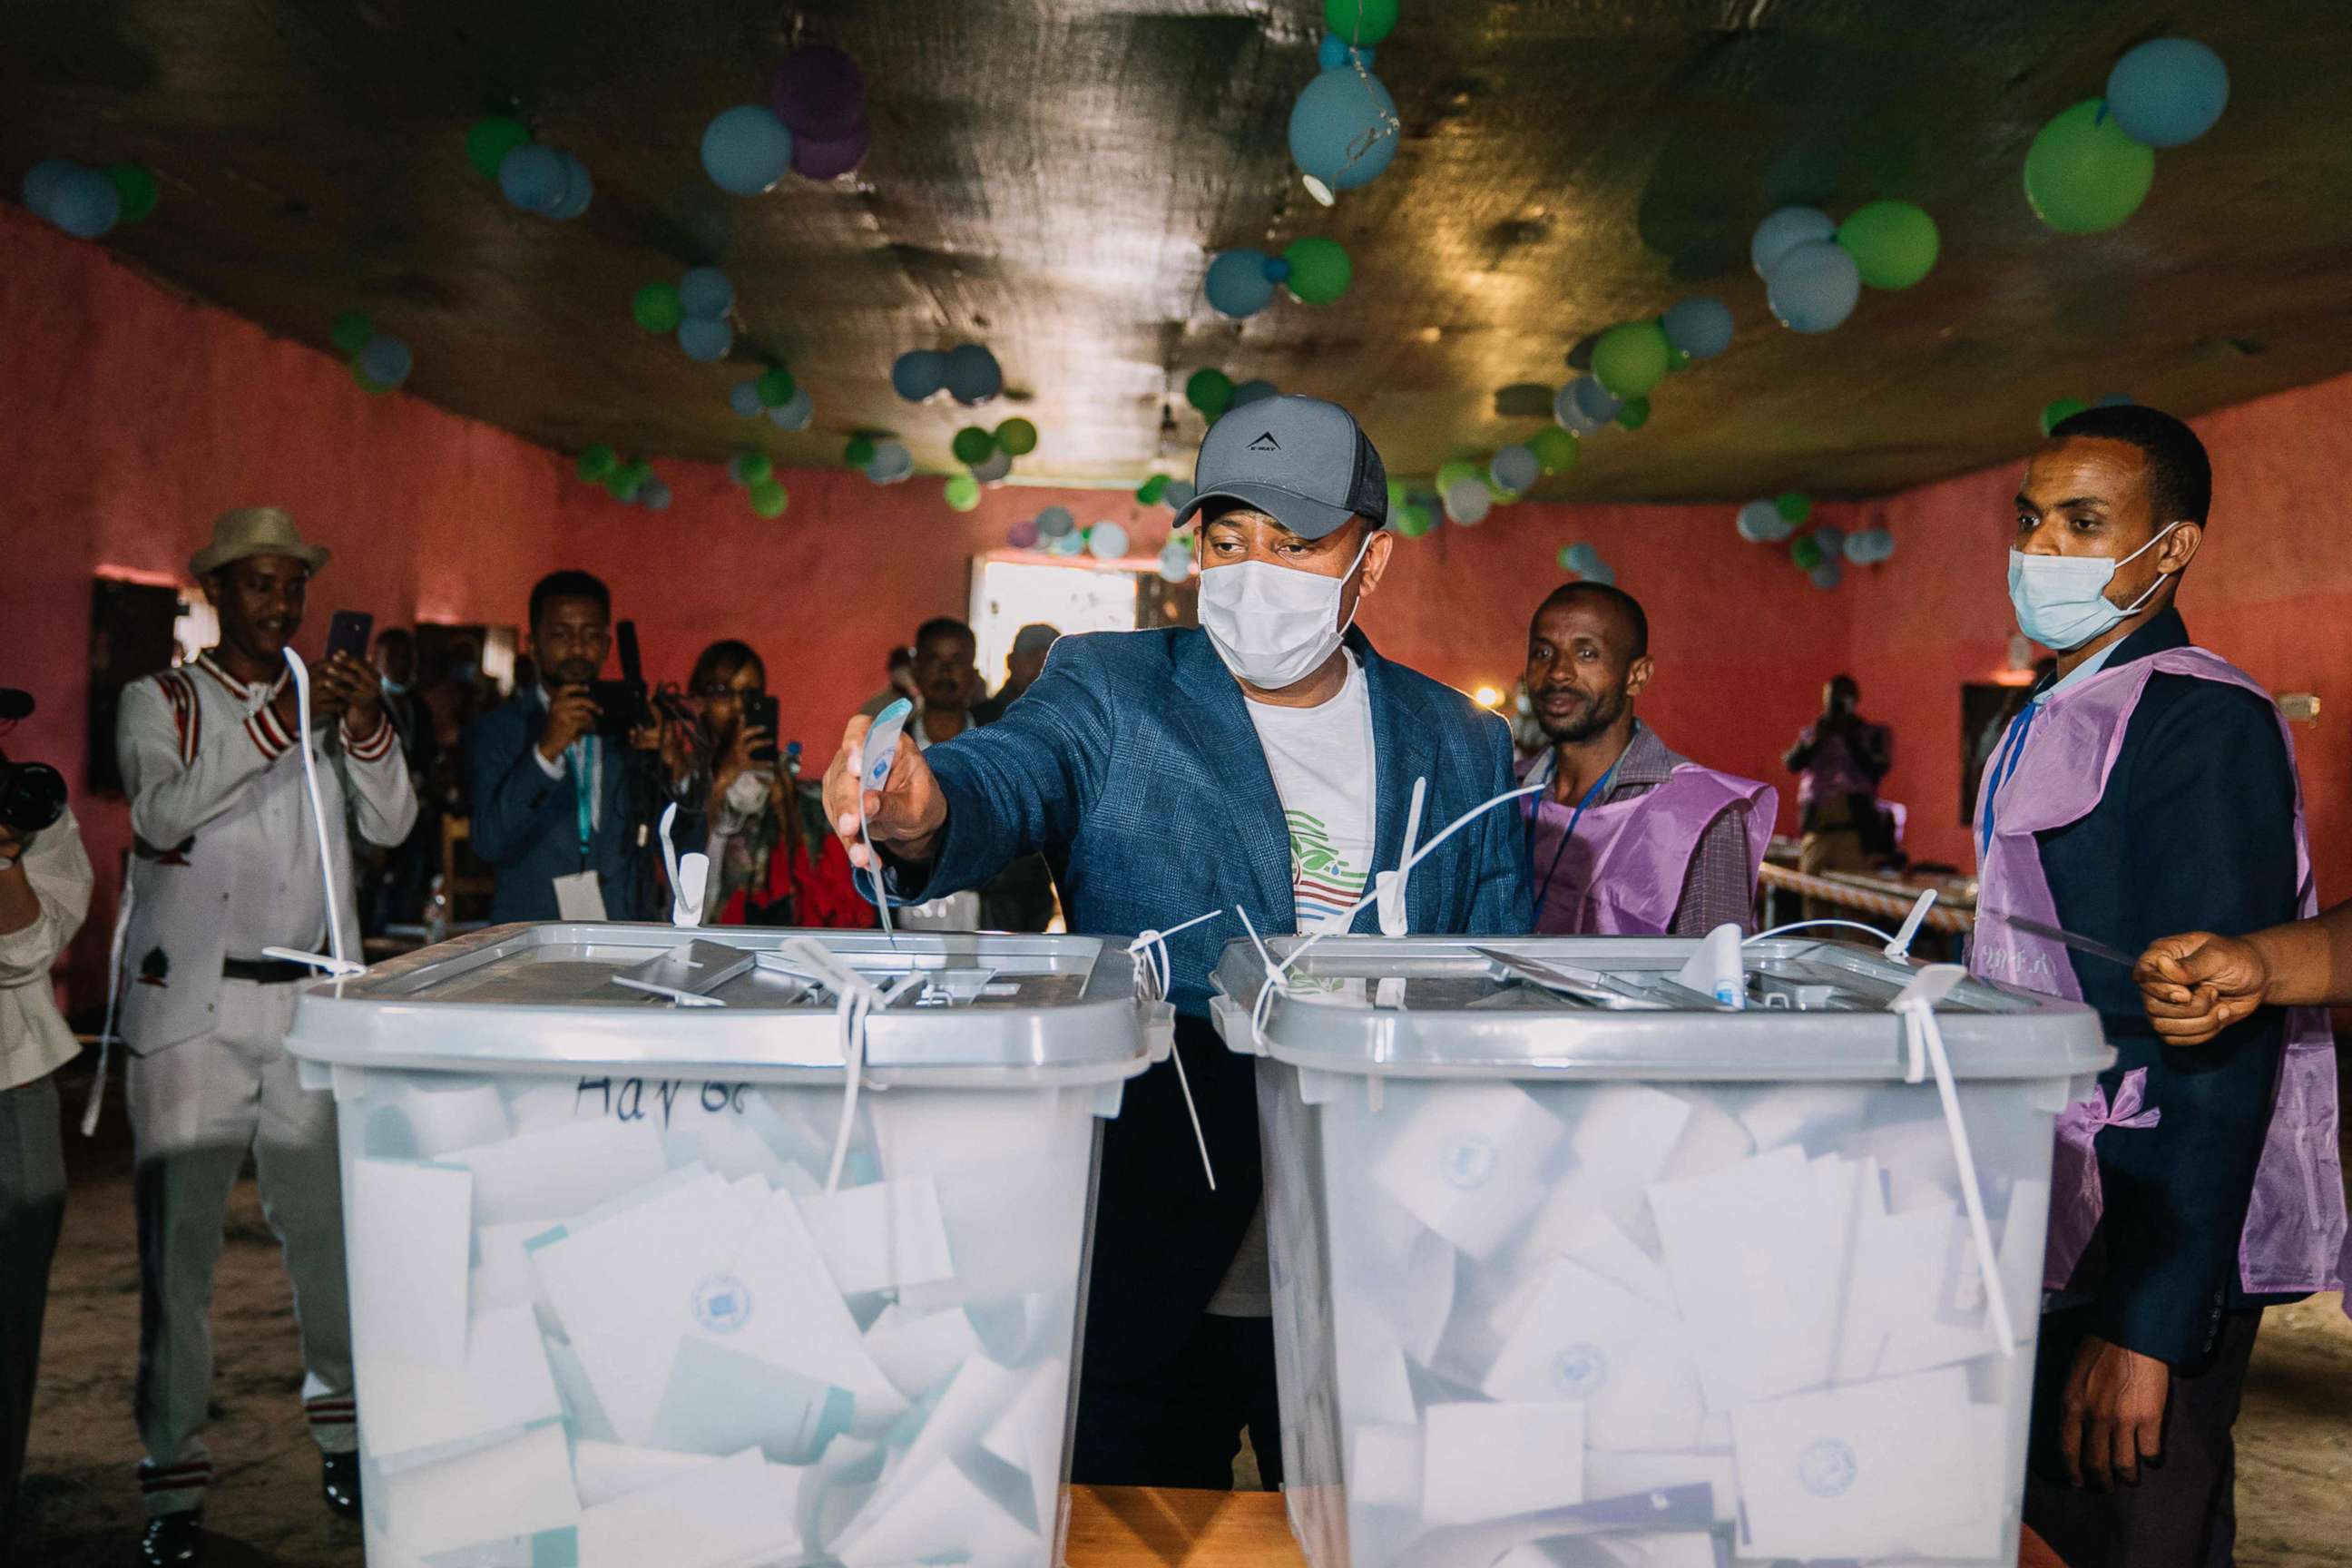 PHOTO: This handout picture taken and released by the Ethiopia Prime Minister Office in Beshasha, Ethiopia on June 21, 2021, shows Ethiopian Prime Minister Abiy Ahmed casting his ballot at a polling station.